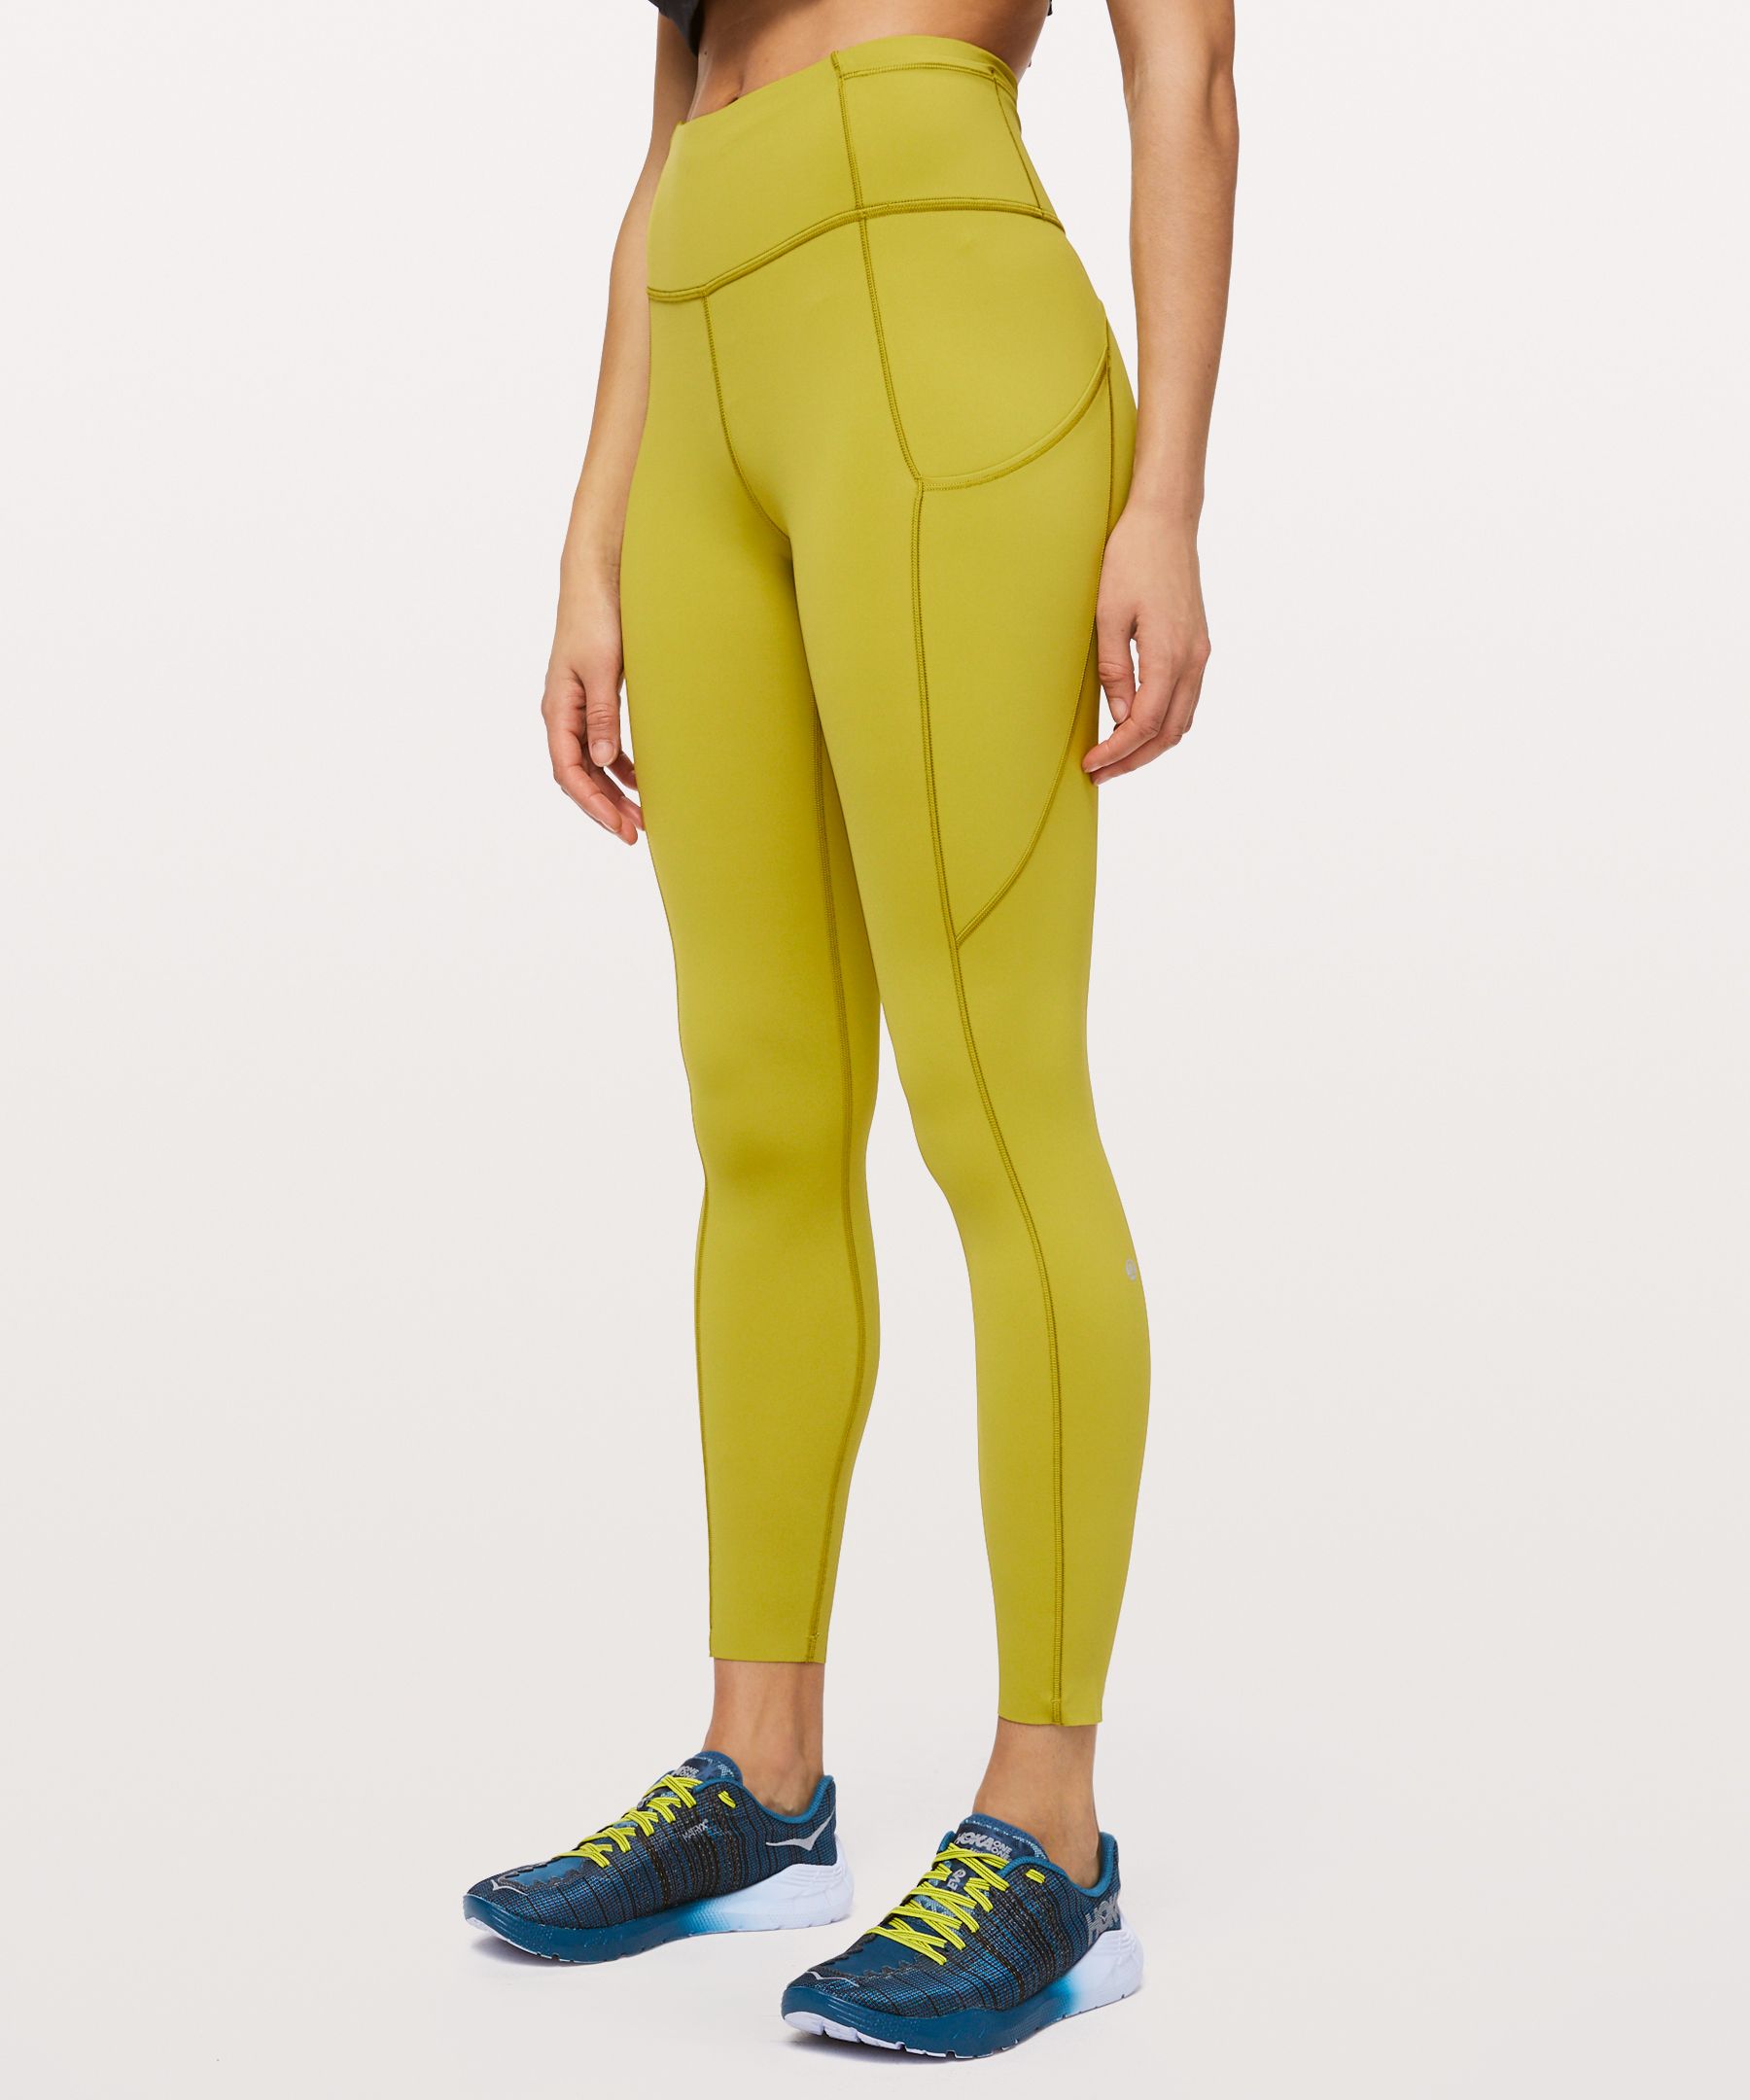 Fast and Free Tight 25 Reflective Nulux